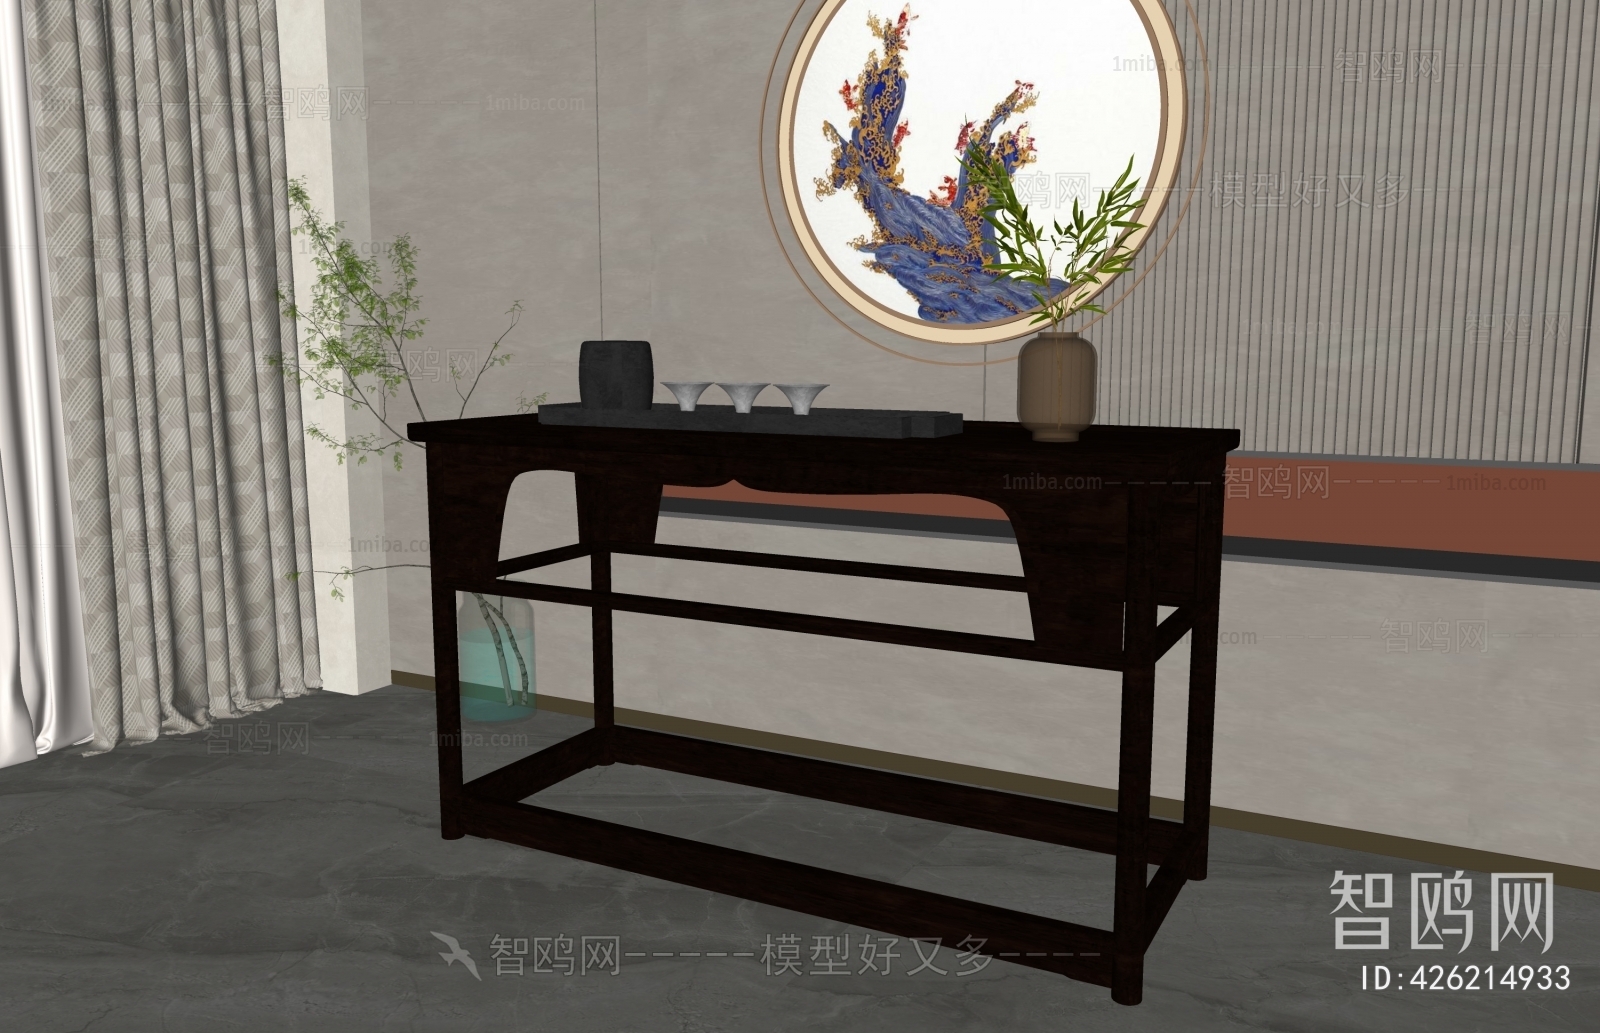 Chinese Style Console